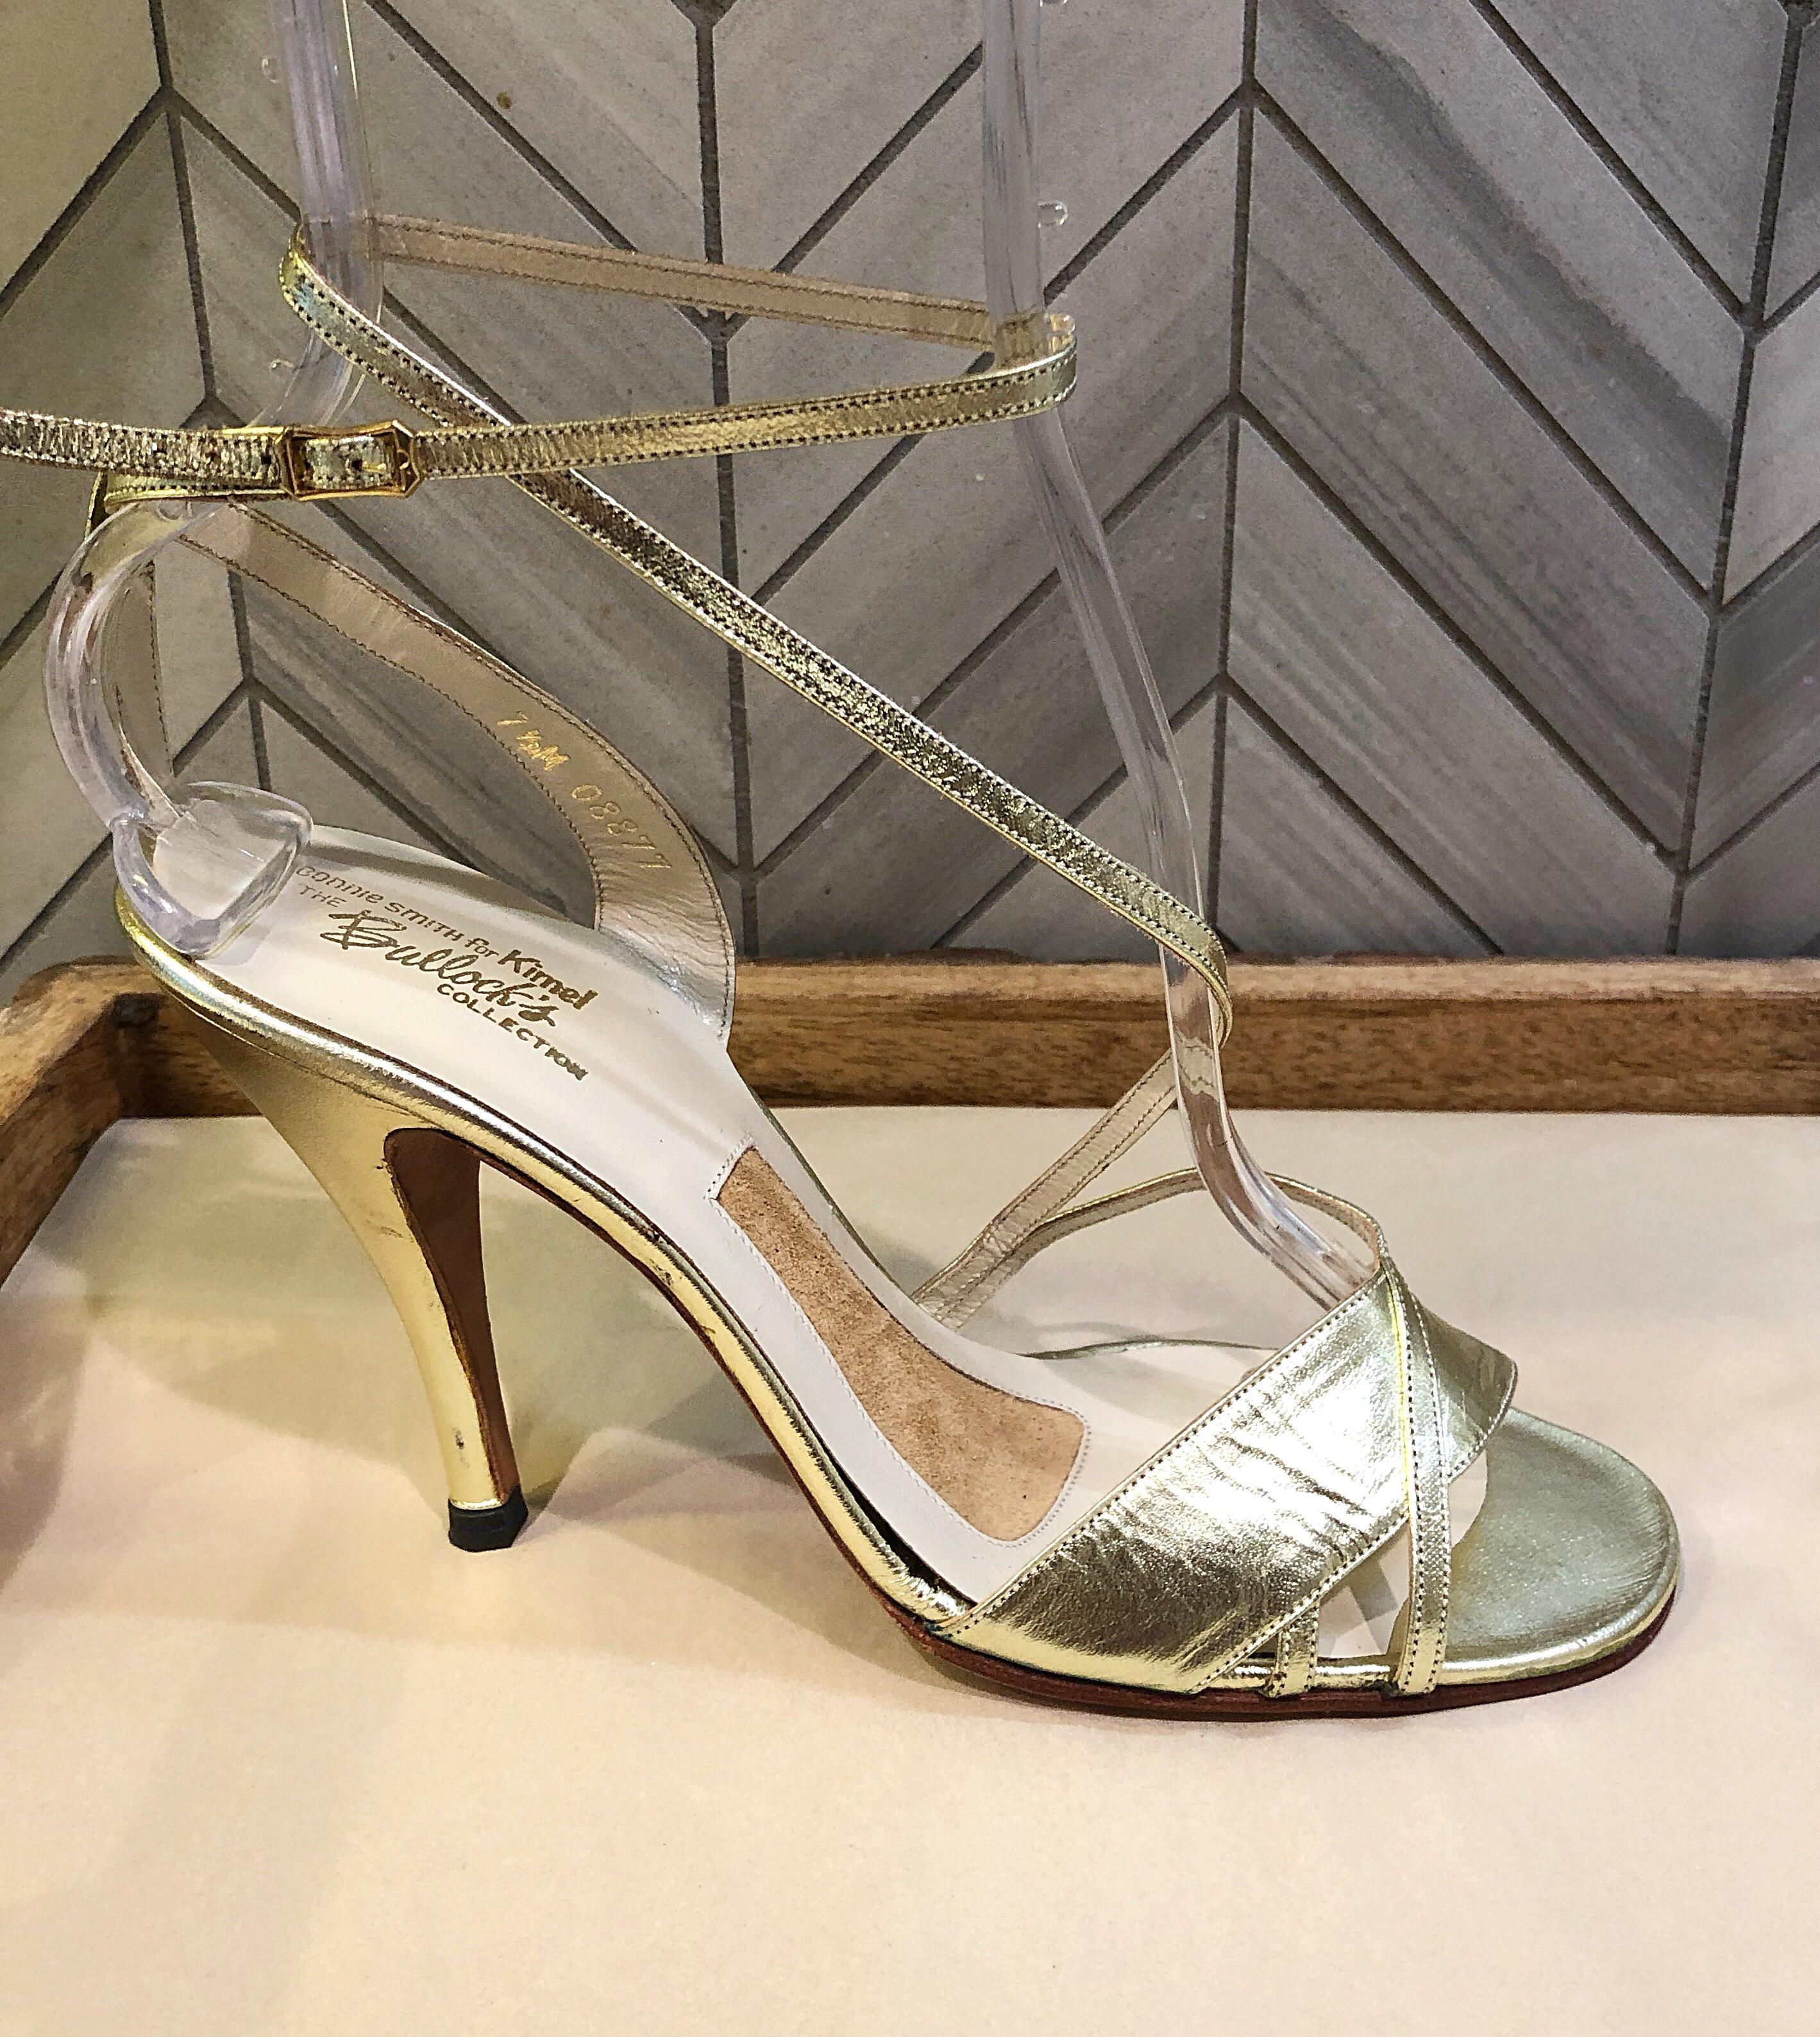 New 1970s Connie Smith Bullocks Wilshire Size 7.5 Gold Metallic Strappy Heels For Sale 5